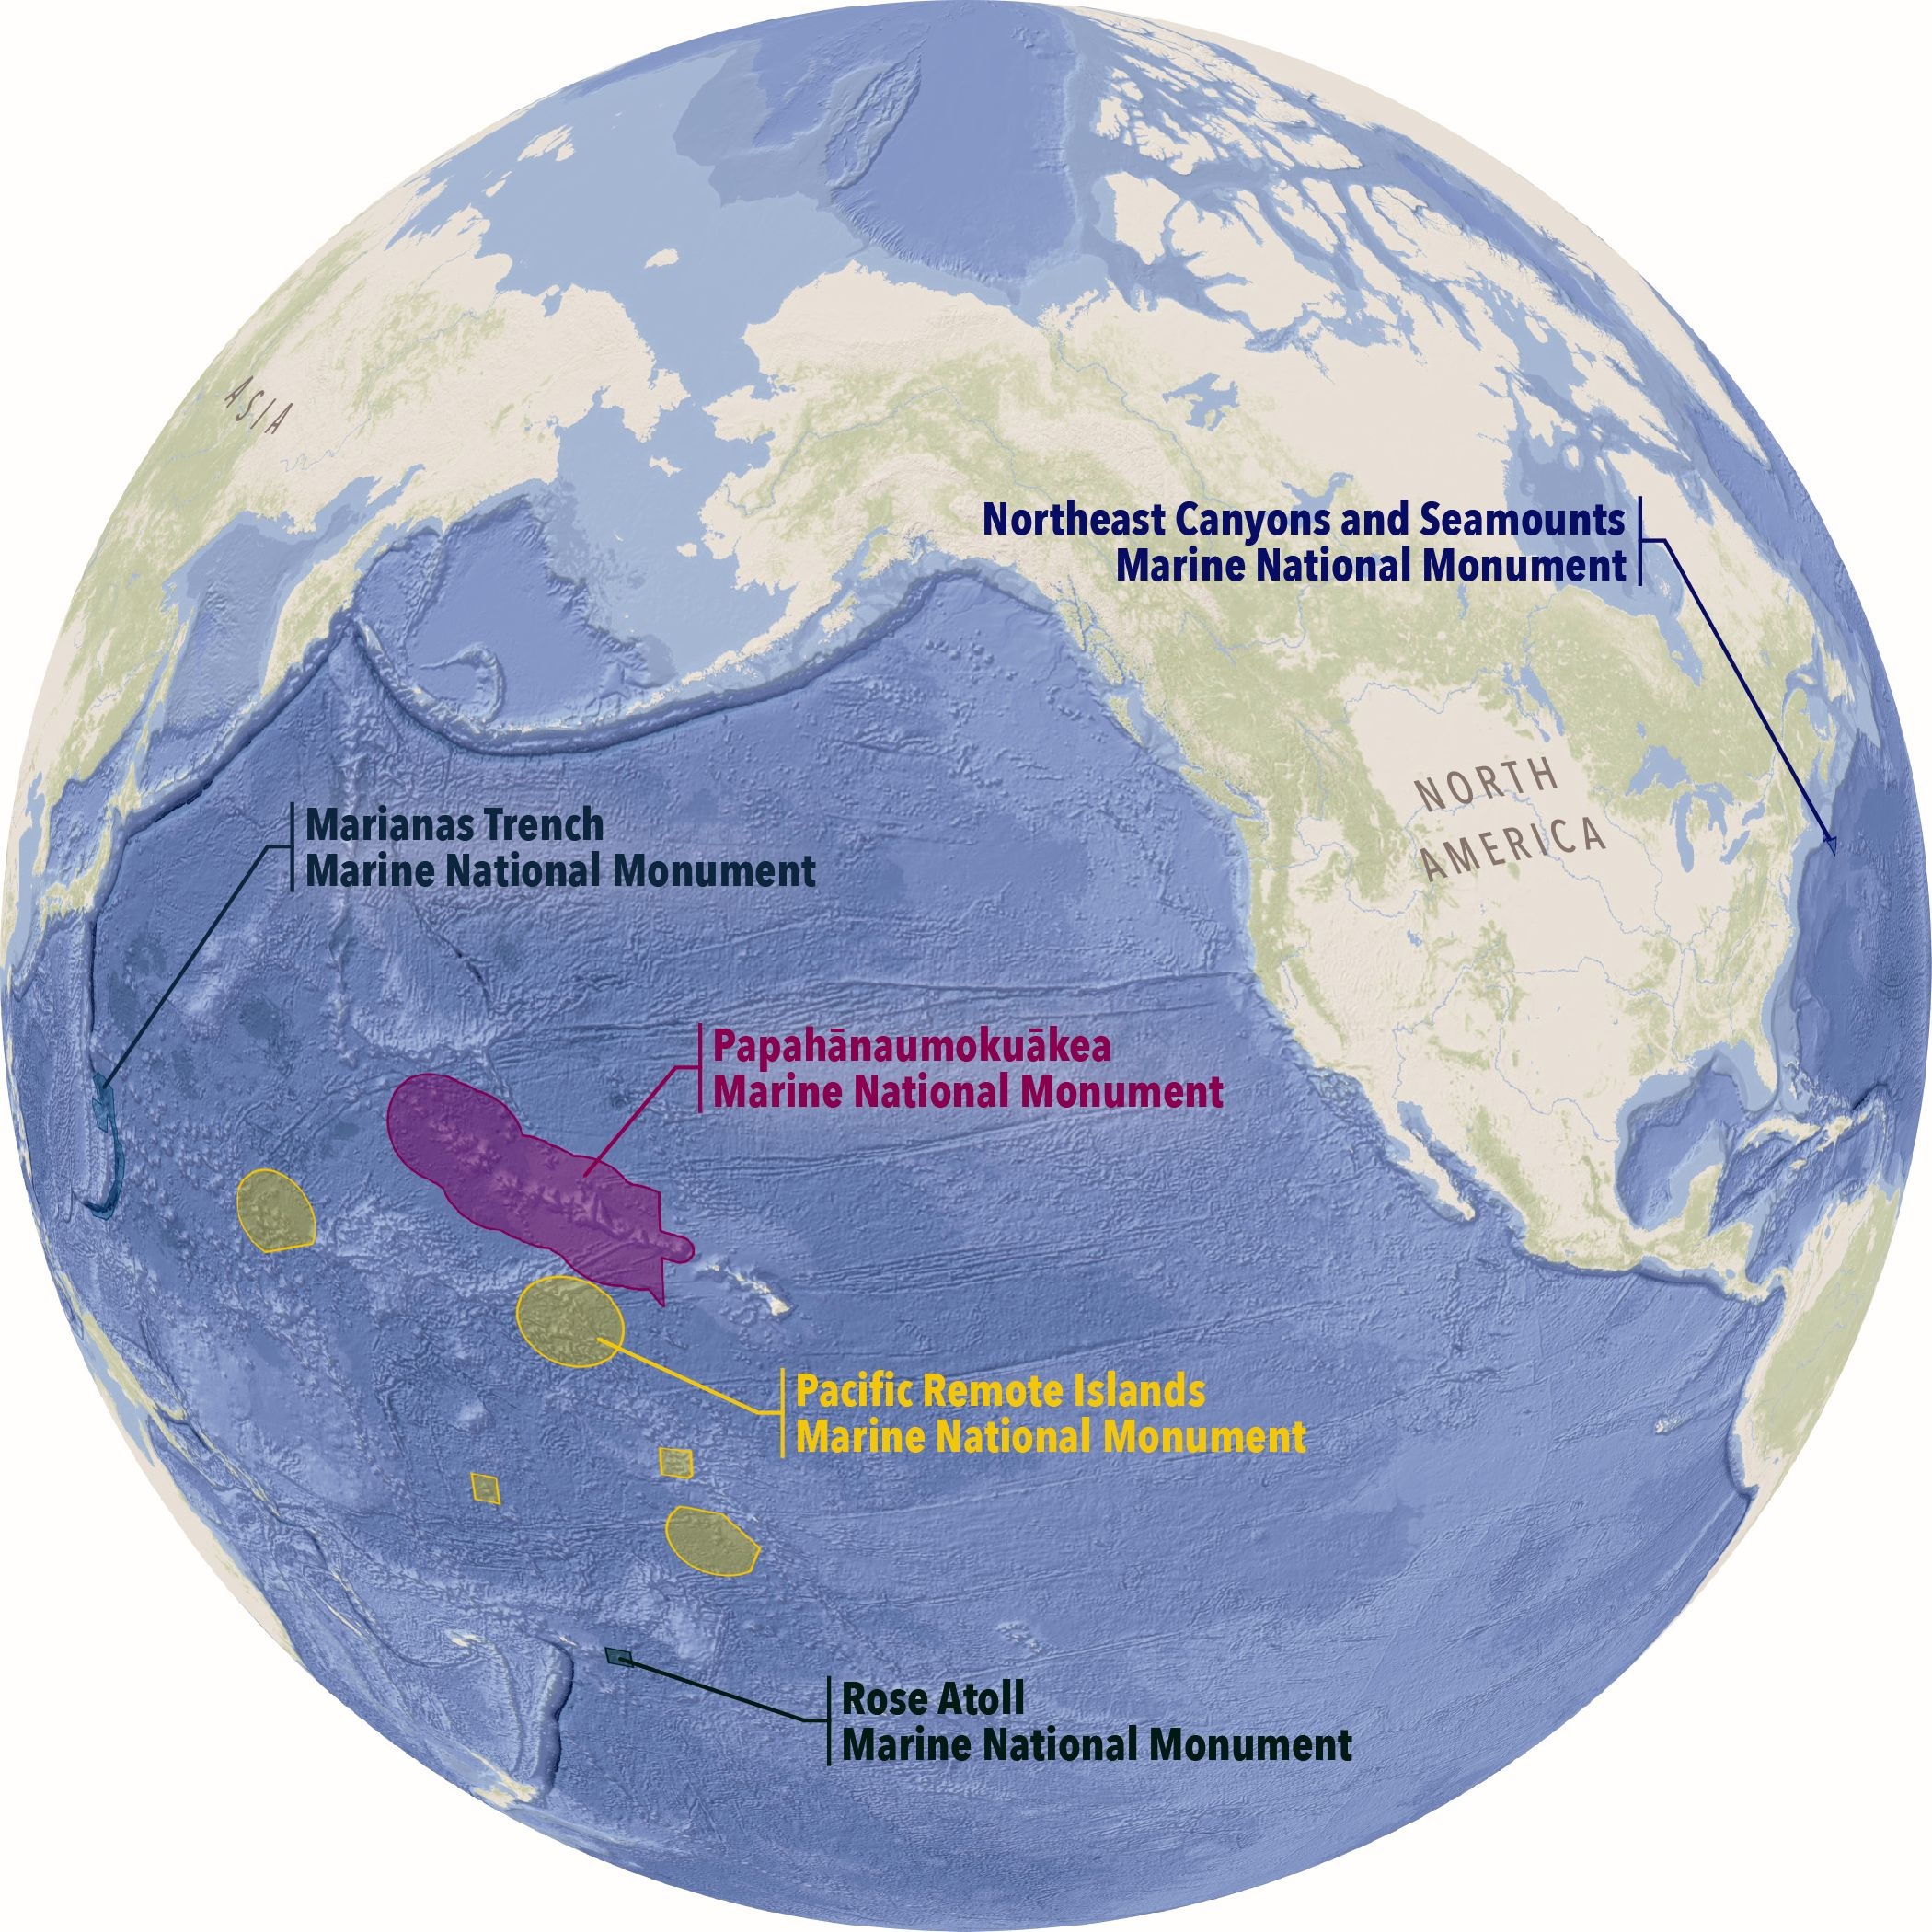 A graphic of the globe showing the five marine national monuments